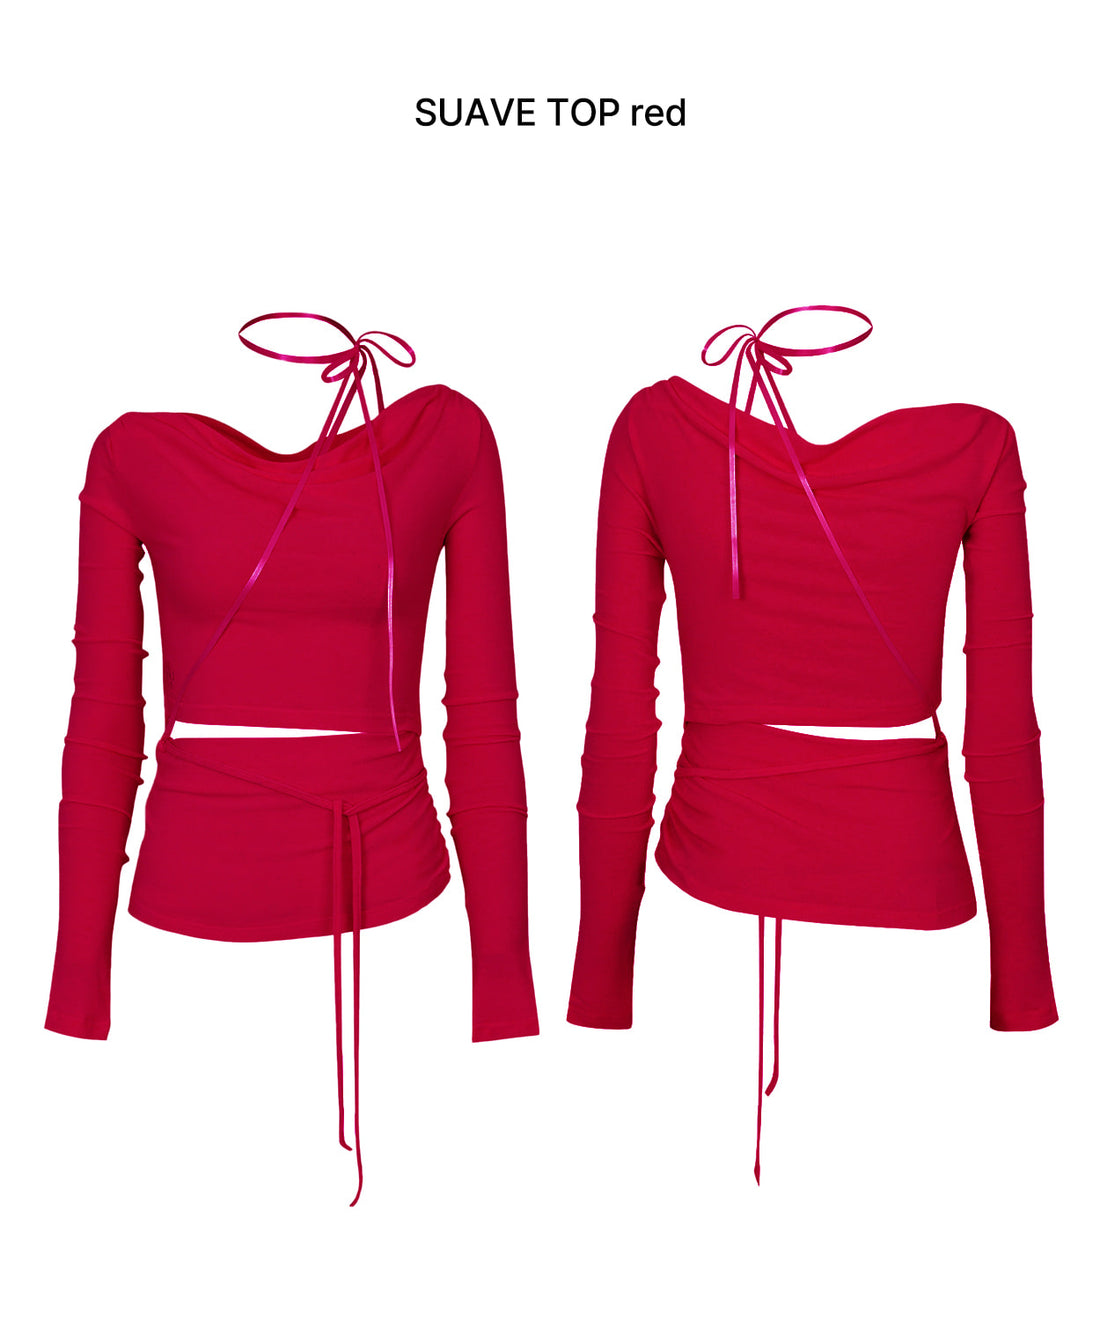 PAIN OR PLEASURE SUAVE TOP RED